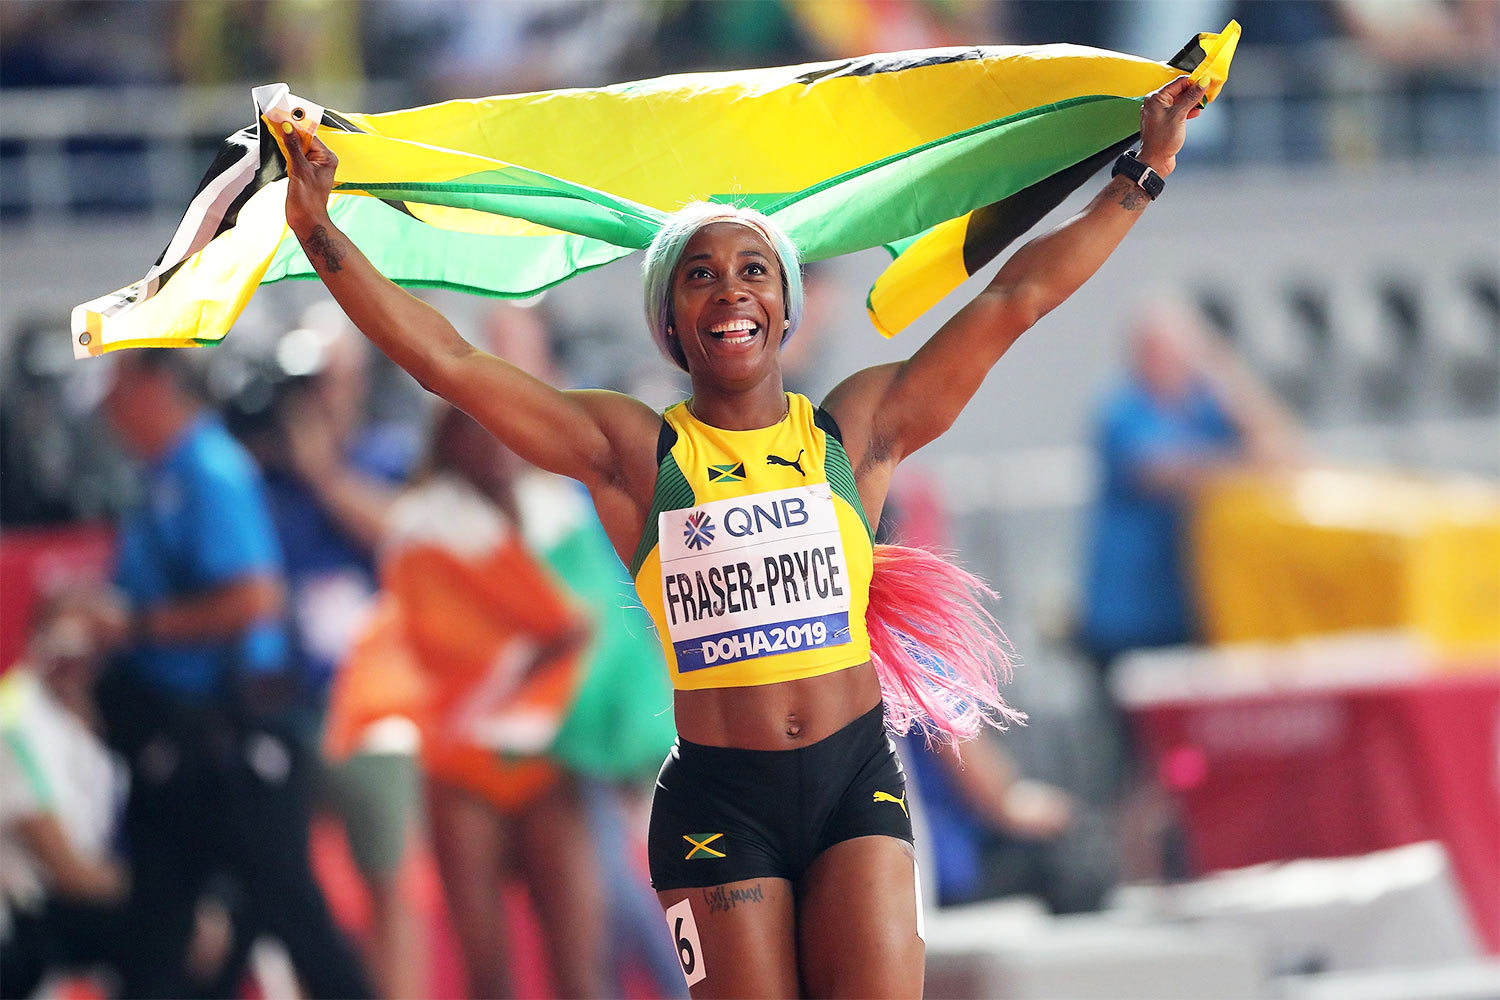 Shelly ann fraser pryce is a jamaican professional track and field sprinter...